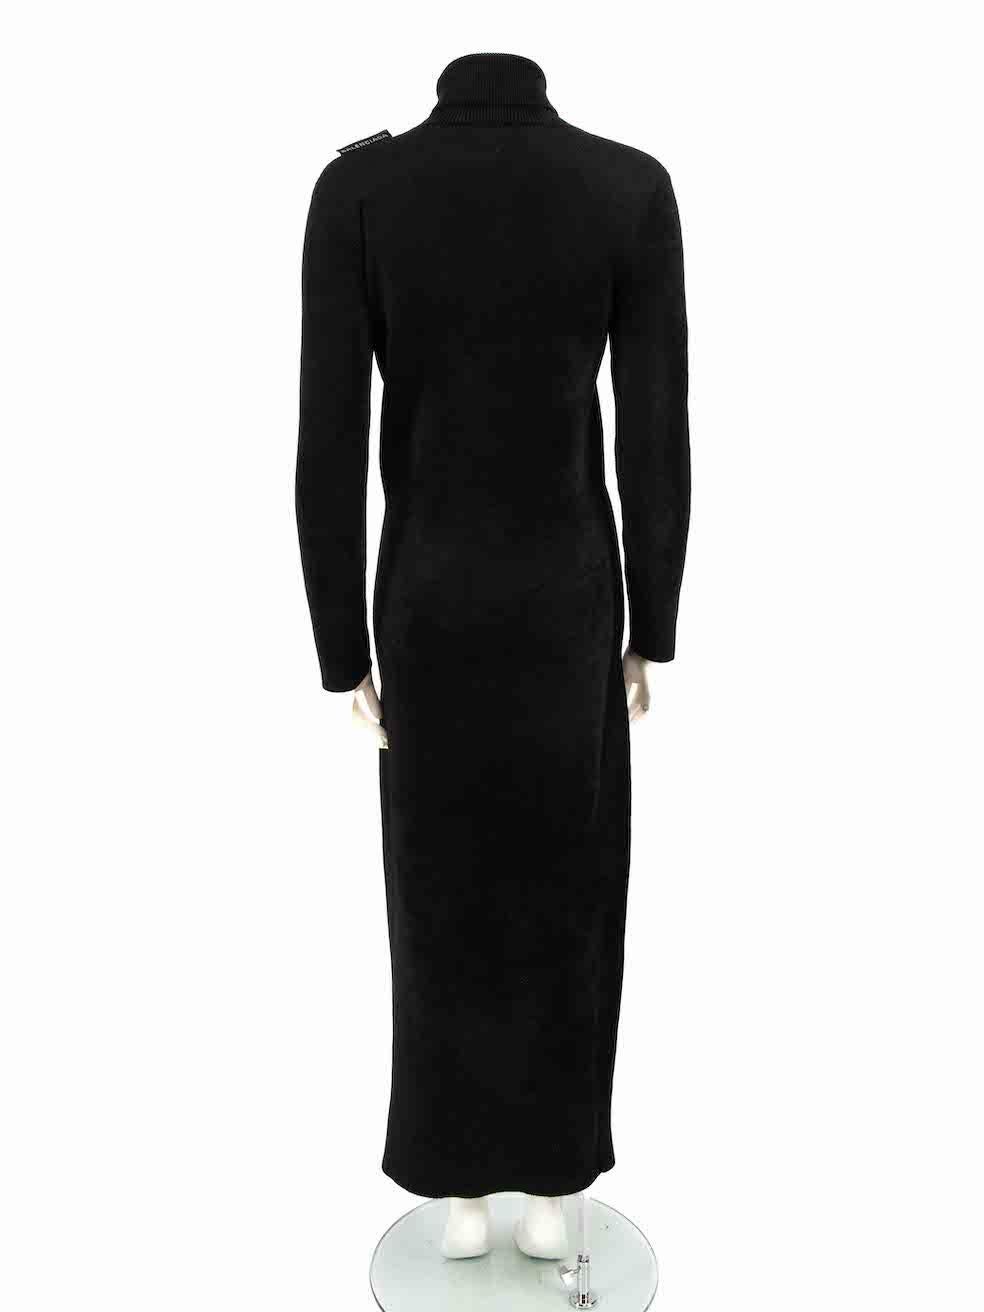 Balenciaga Black Stretch Turtleneck Maxi Dress Size M In Excellent Condition For Sale In London, GB